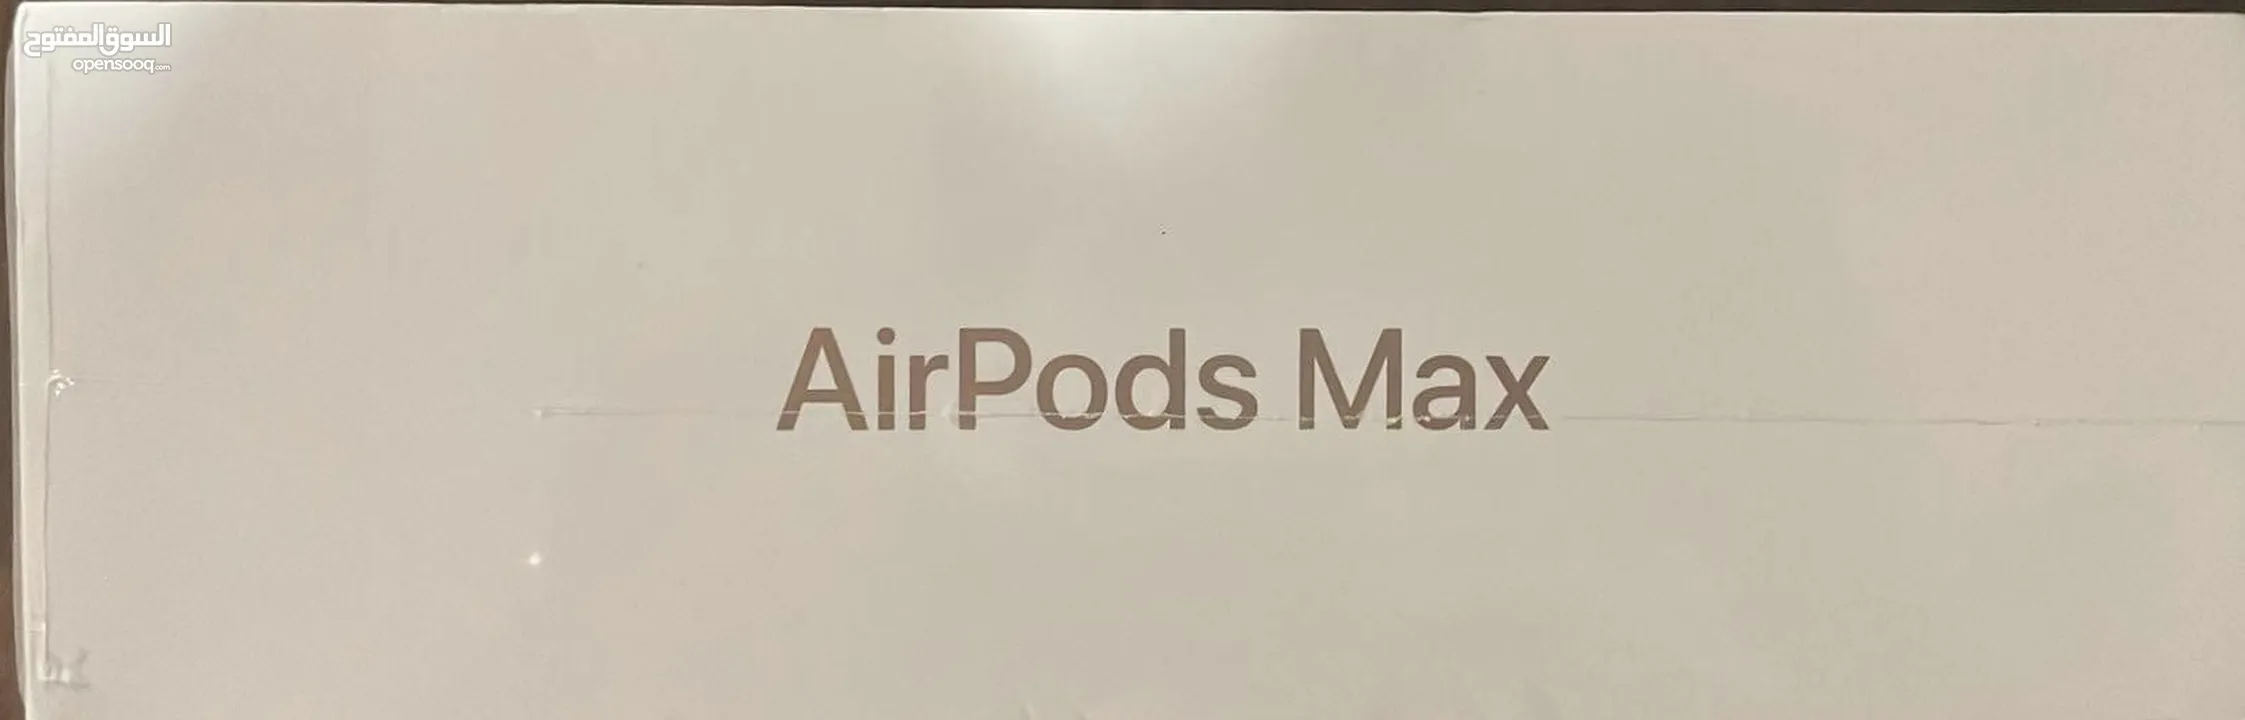 Apple airpods max سماعات